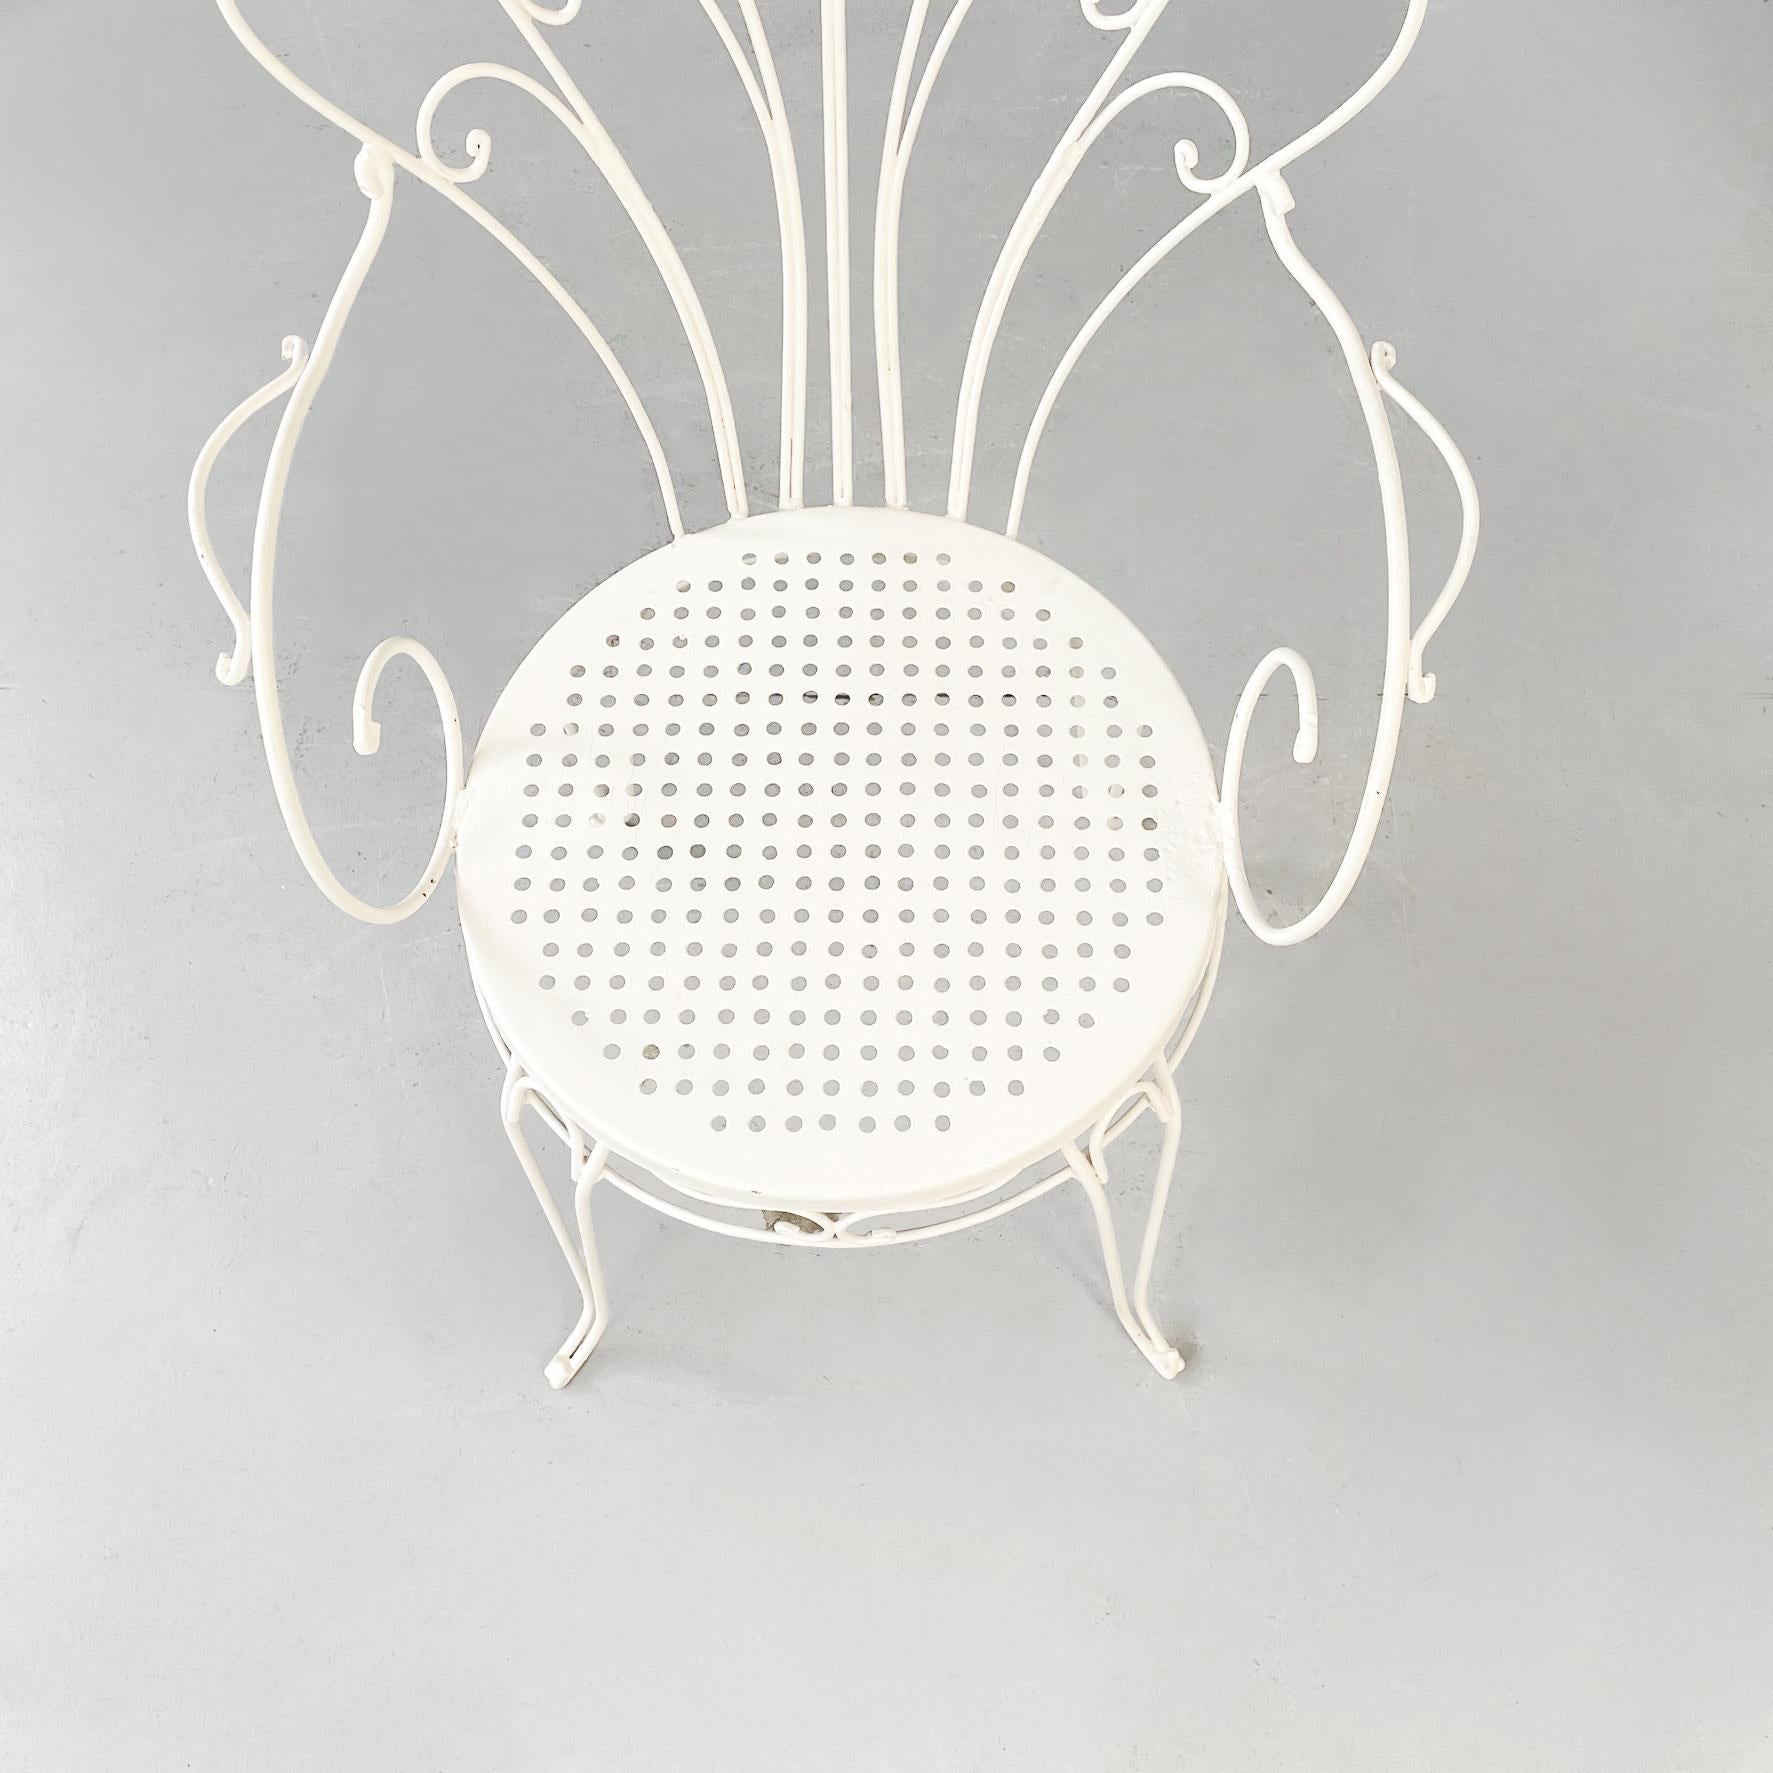 Mid-20th Century Italian Mid-Century Garden Chairs in White Wrought Iron with Curls, 1960s For Sale